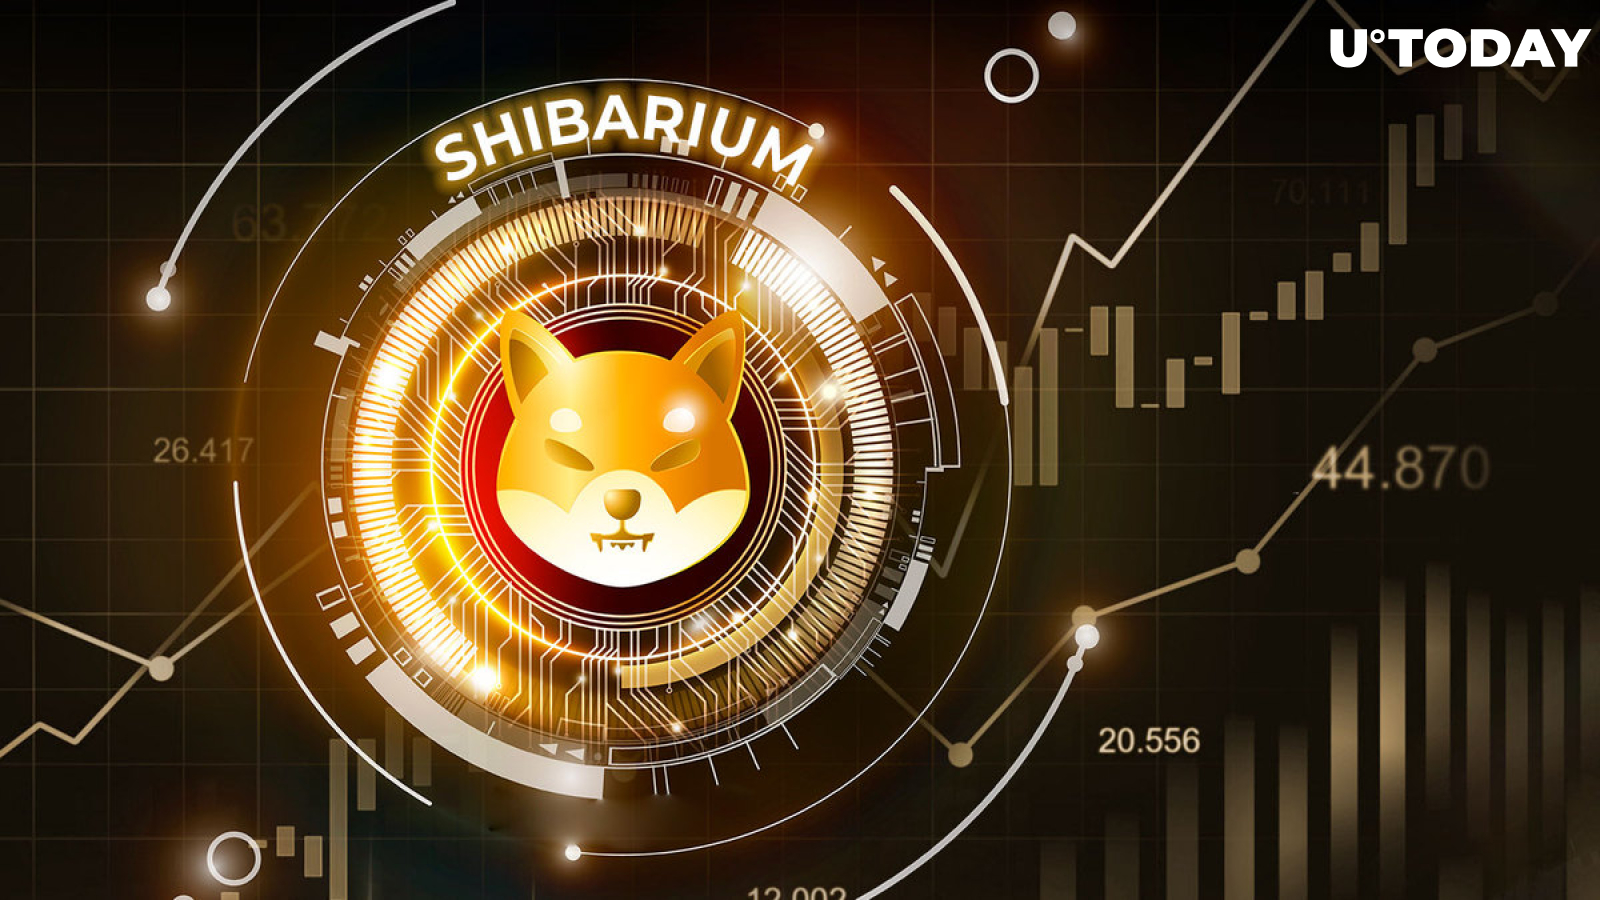 Shibarium on Verge of Major Record as Transactions Shoot up 209%